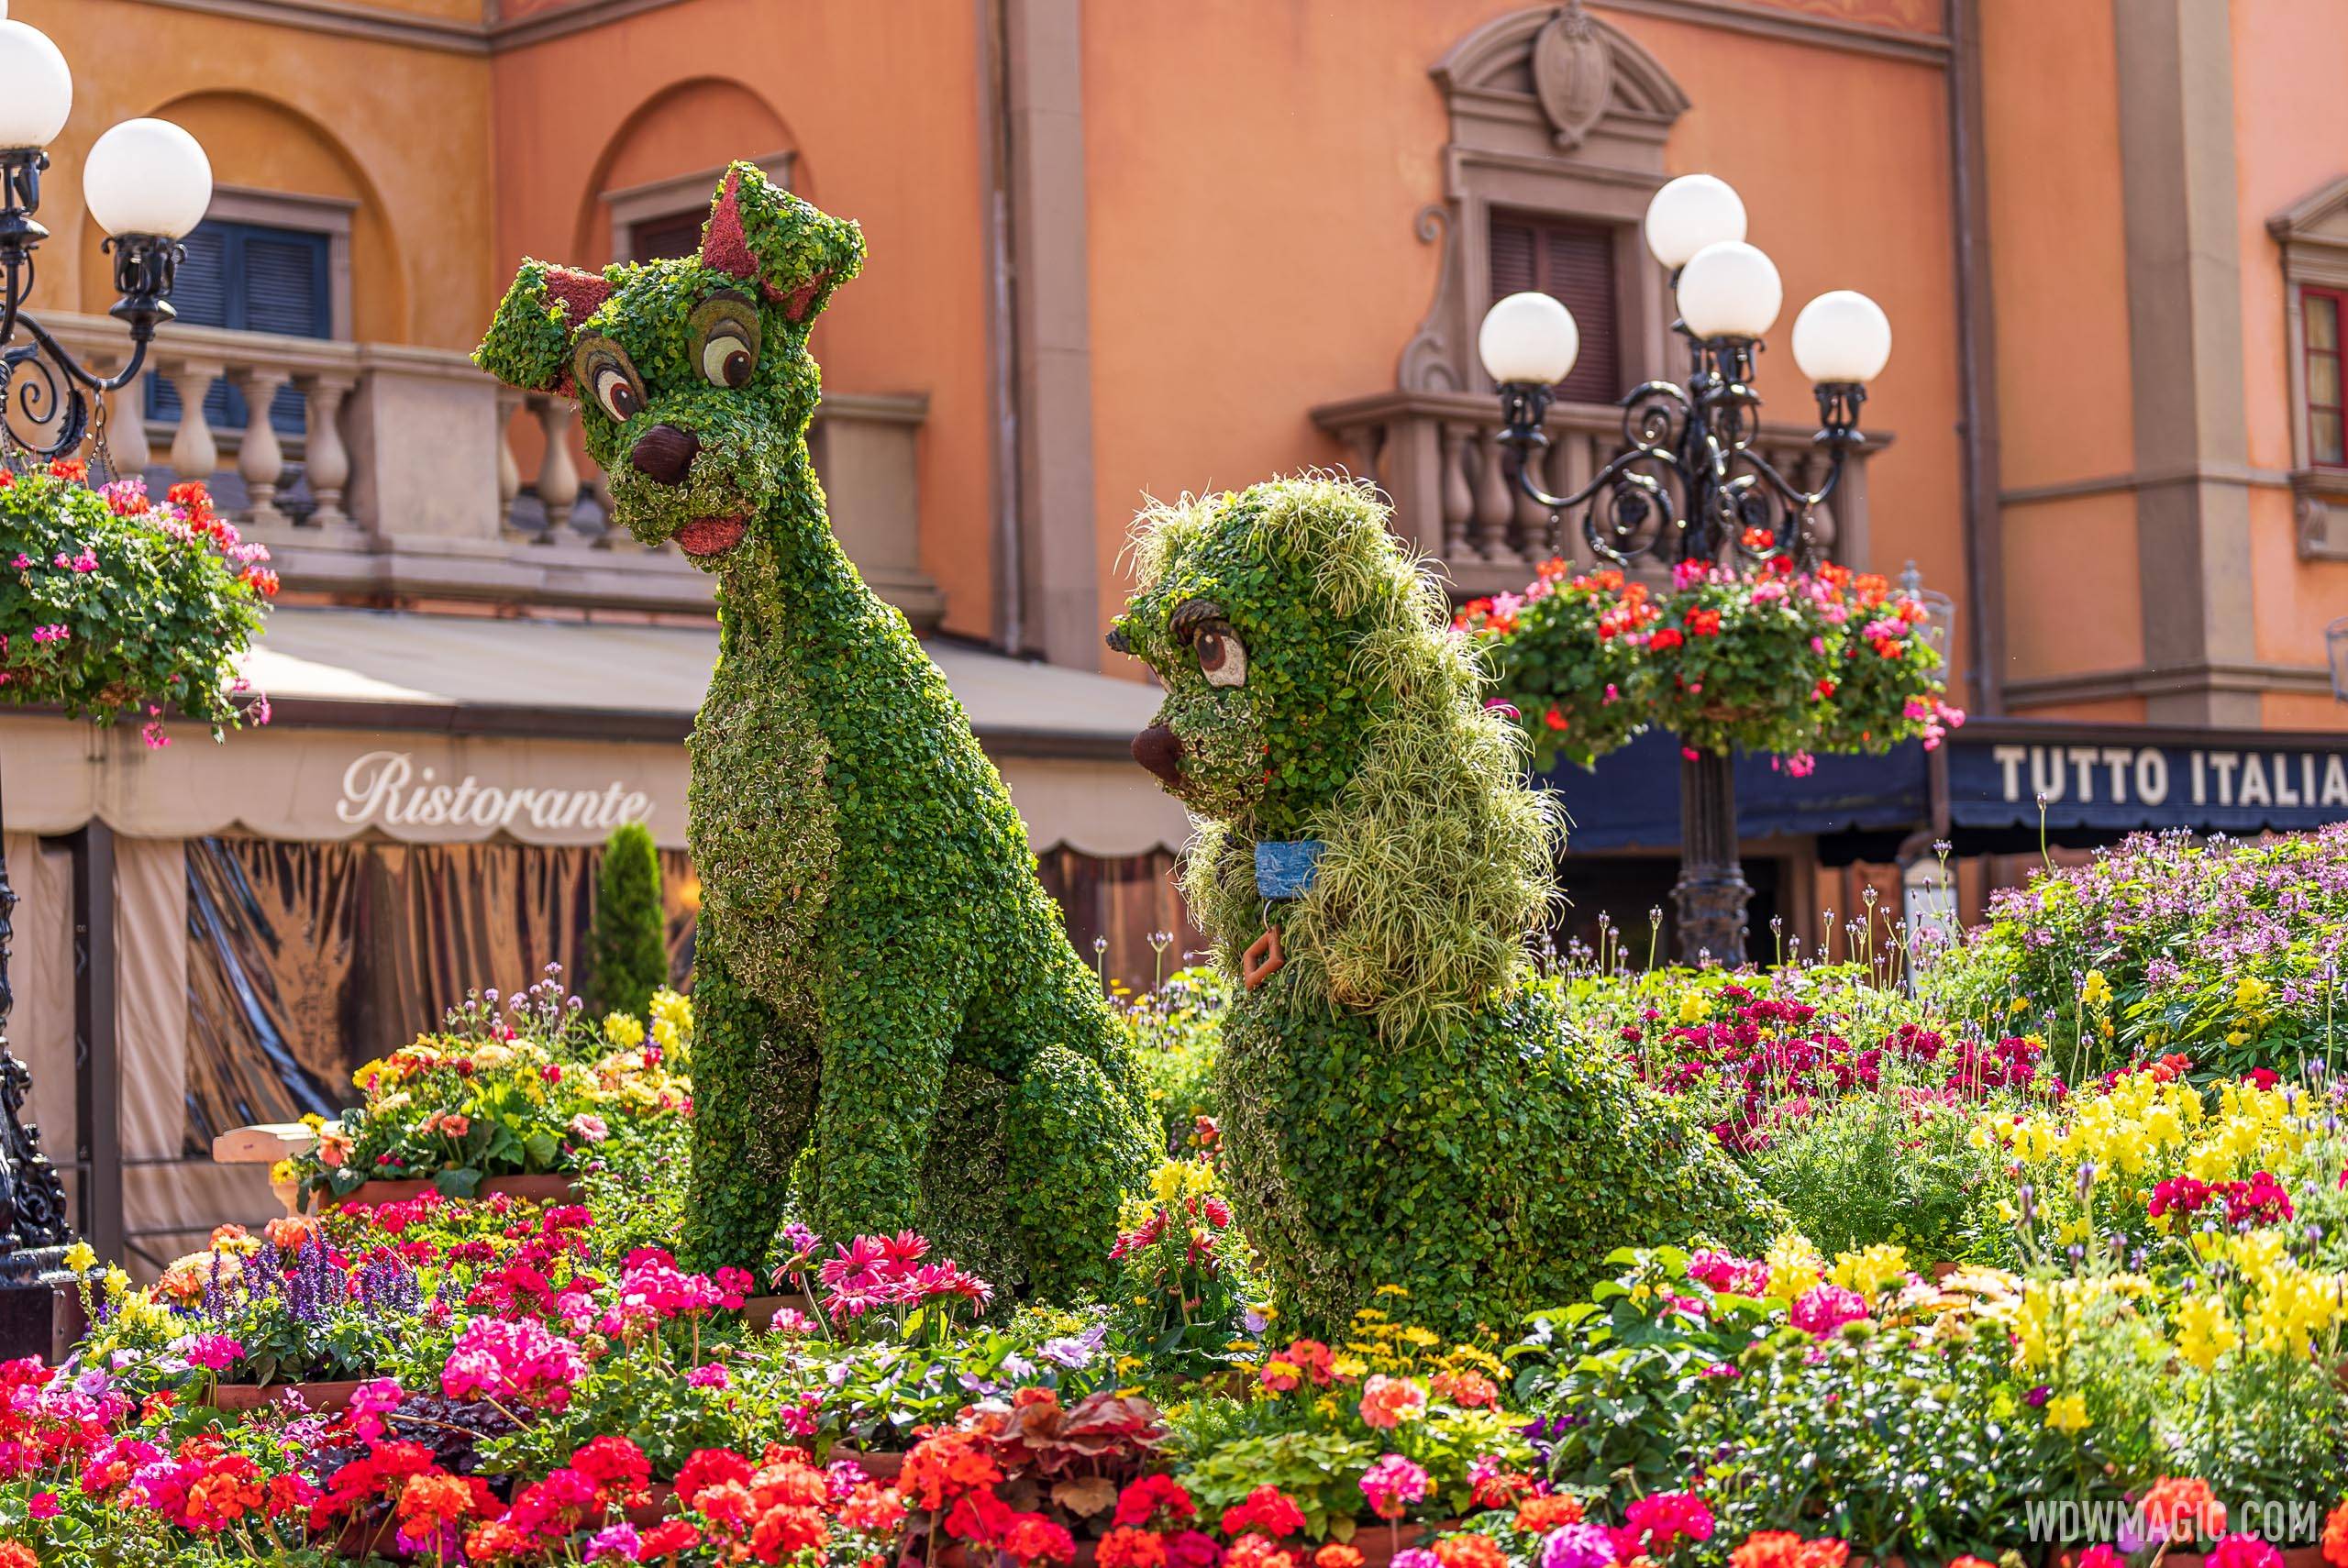 Lady and the Tramp – Italy Pavilion